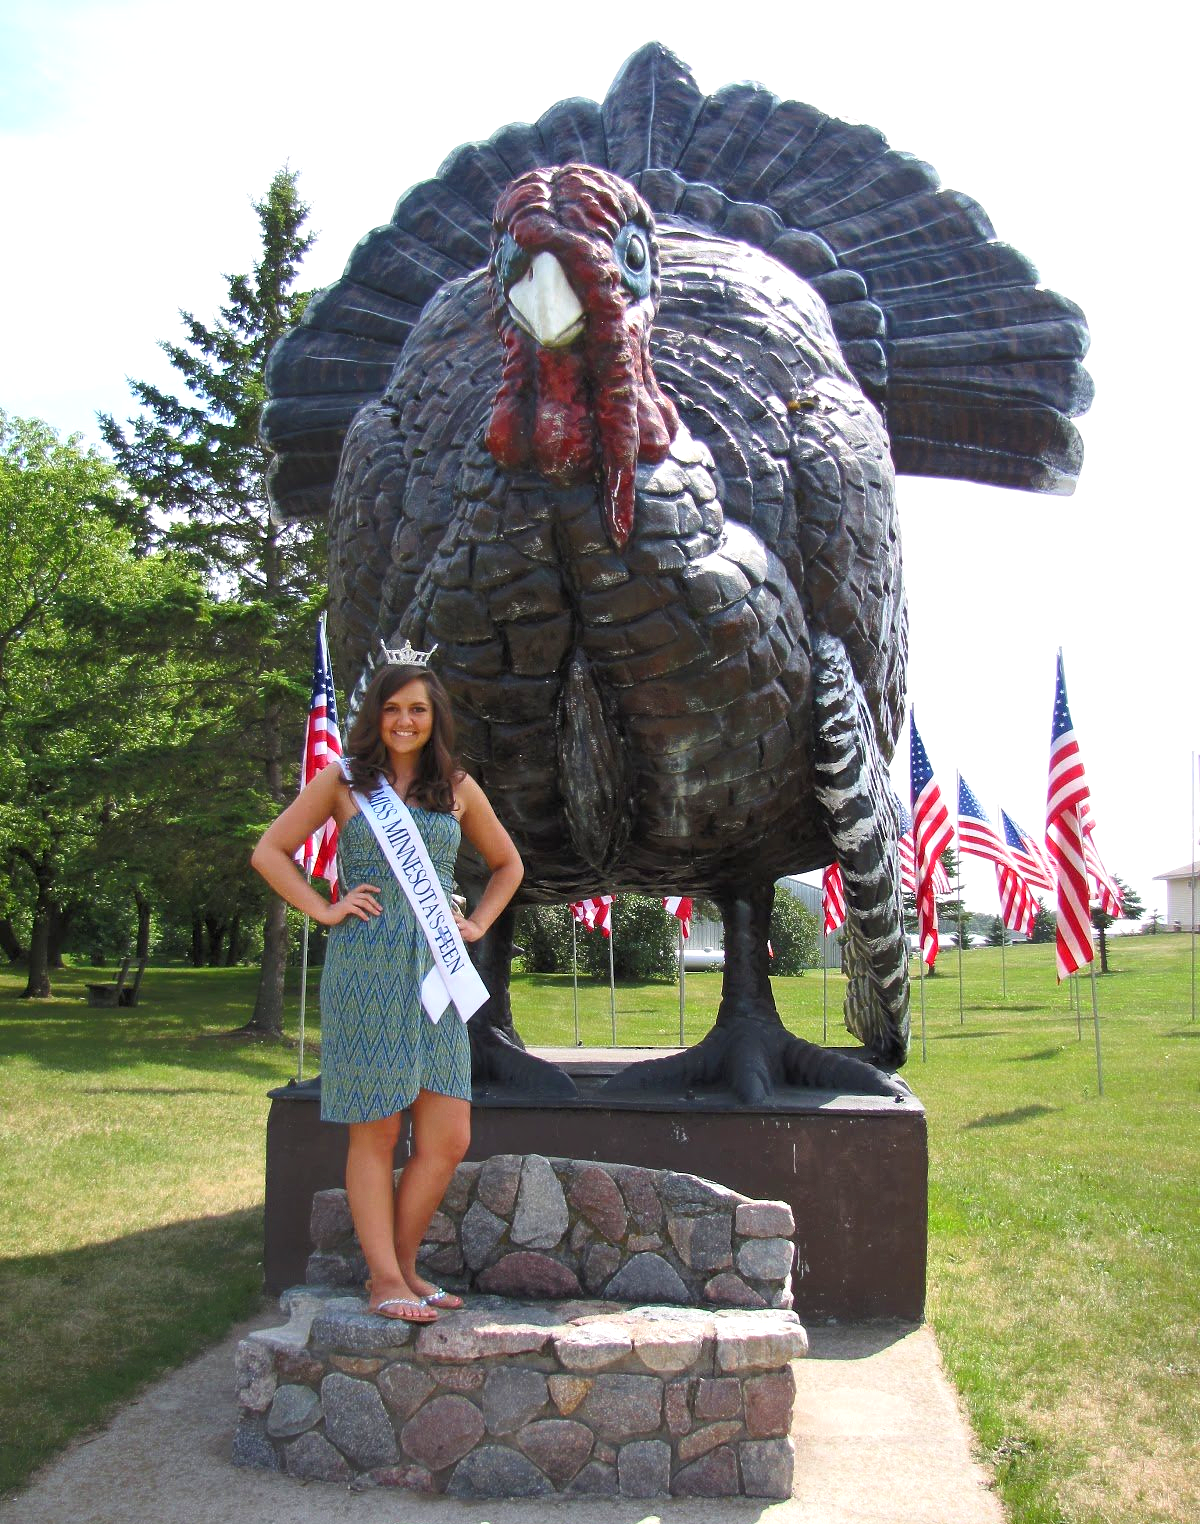 Largest monument to the Turkey: Frazee's 'Big Tom' sets world record